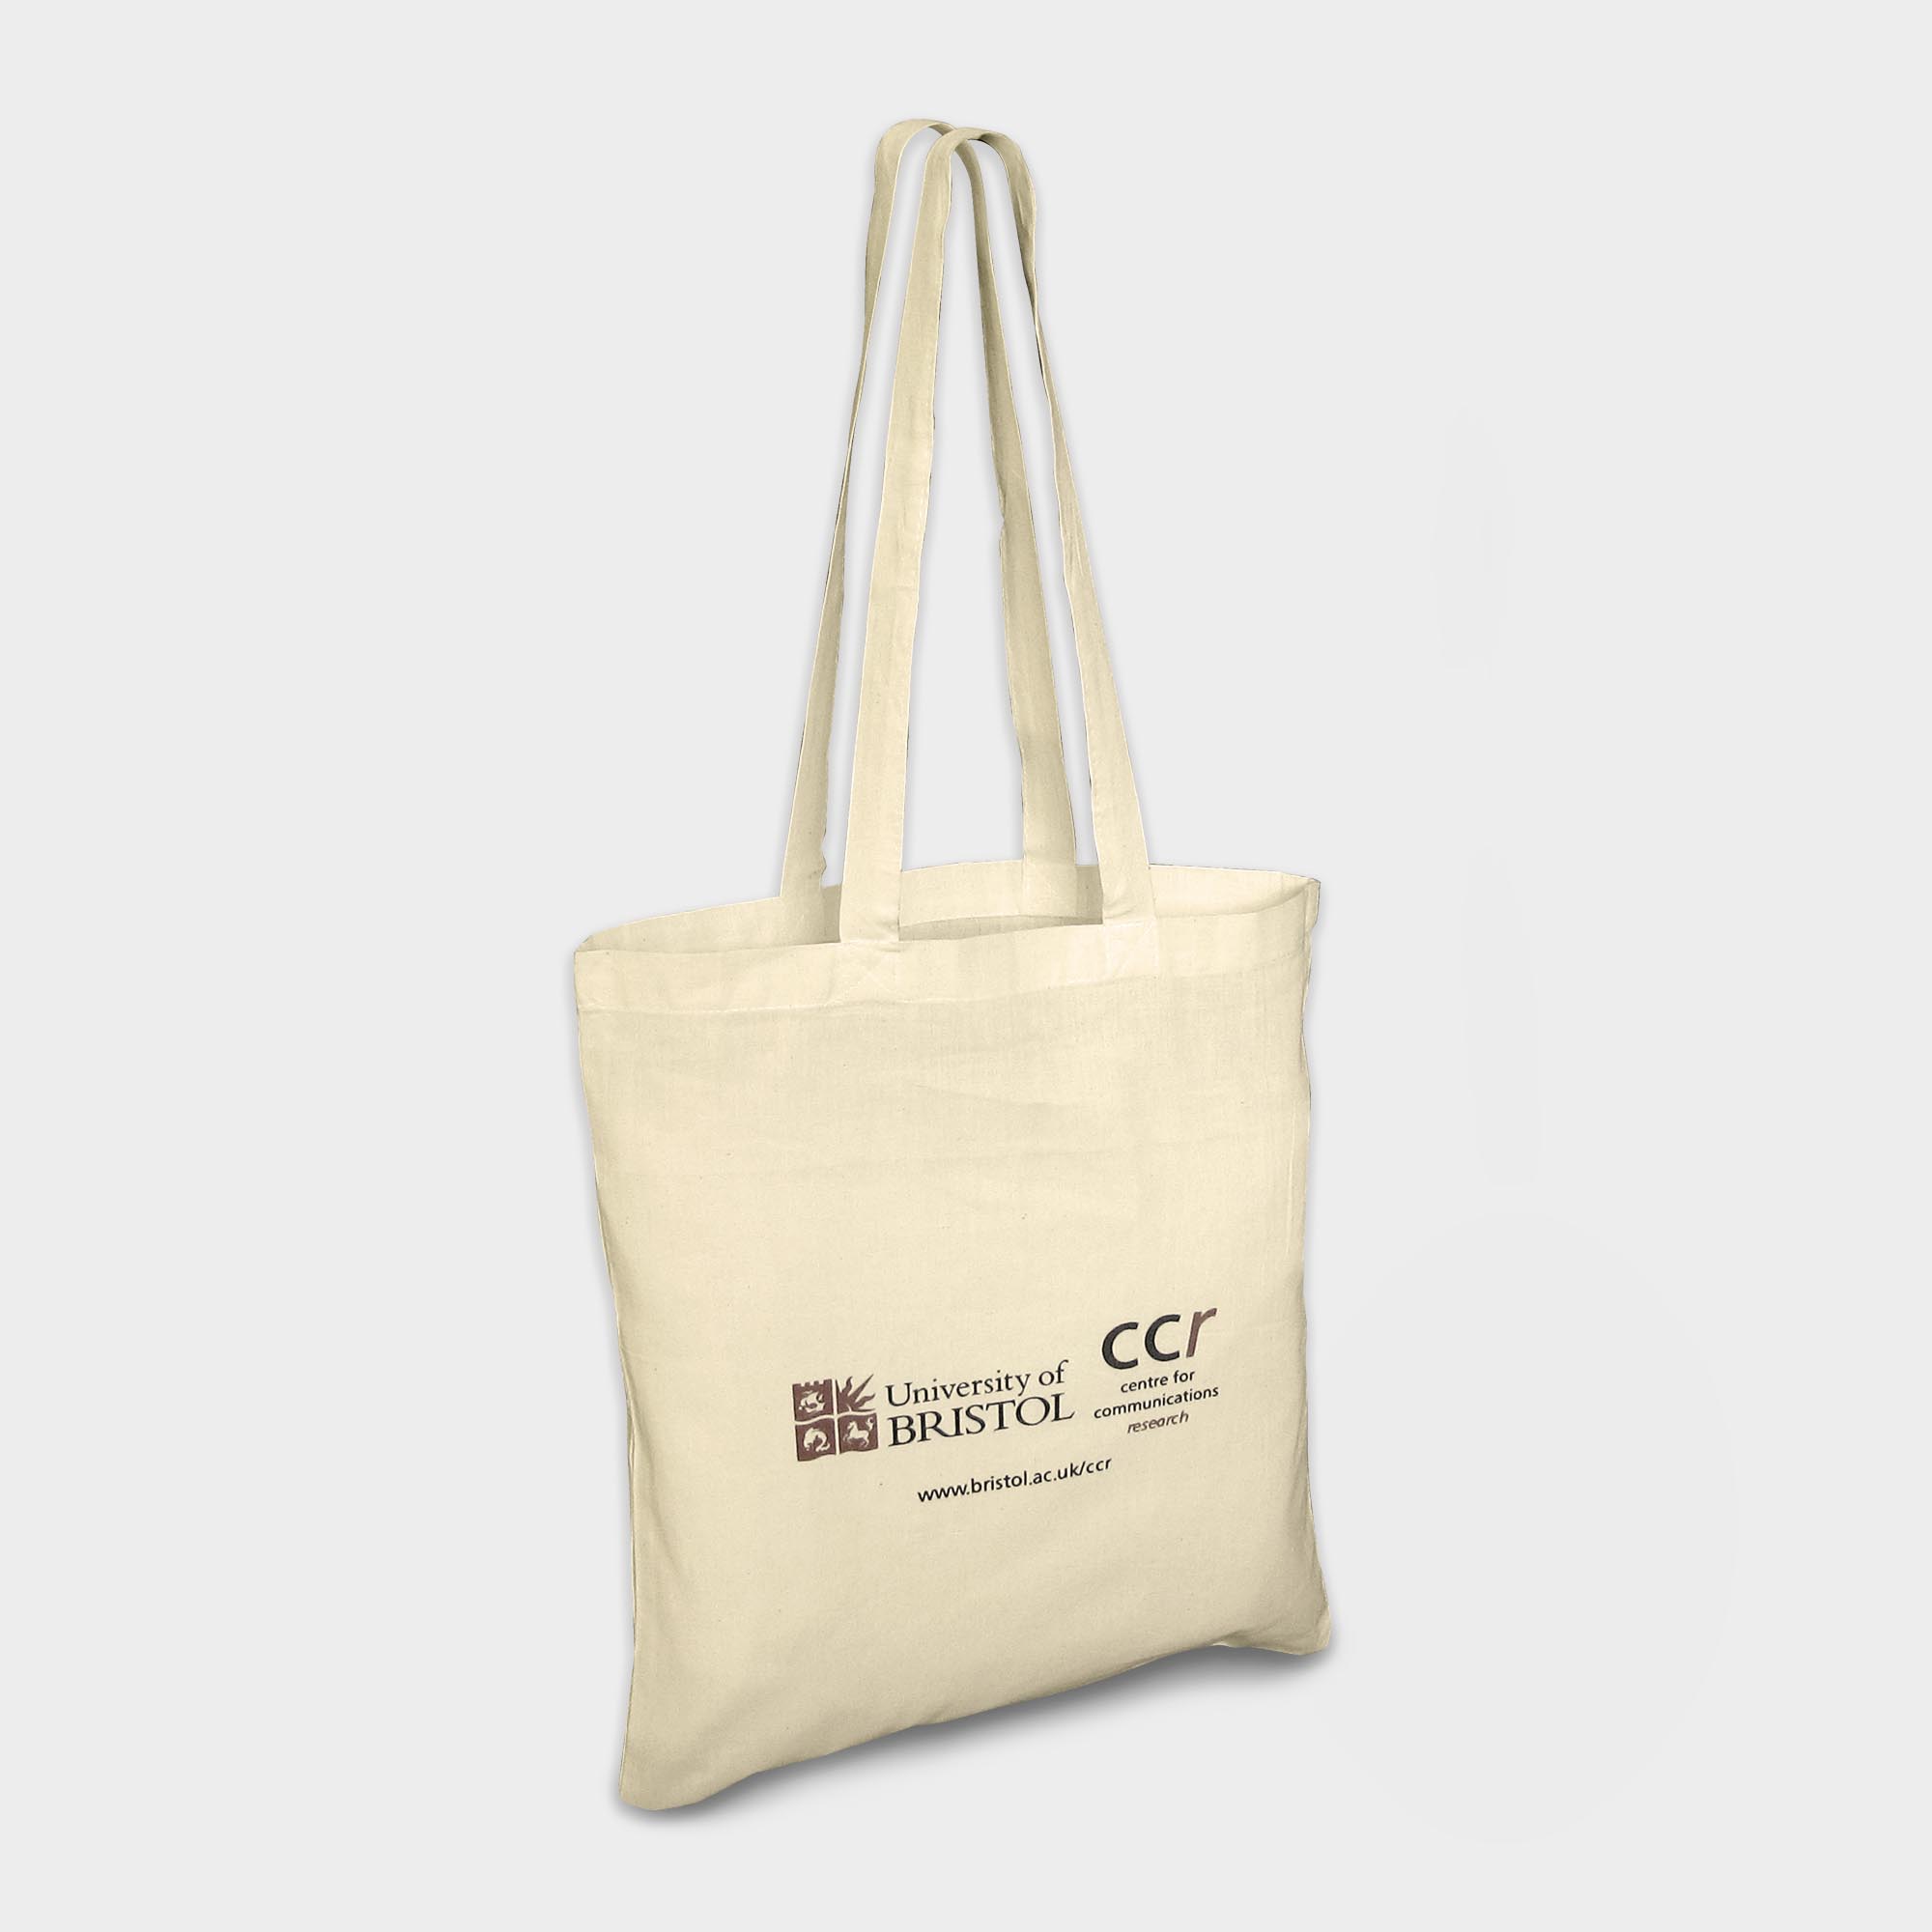 The Green & Good Great Value Cotton Shopping bag with long handles